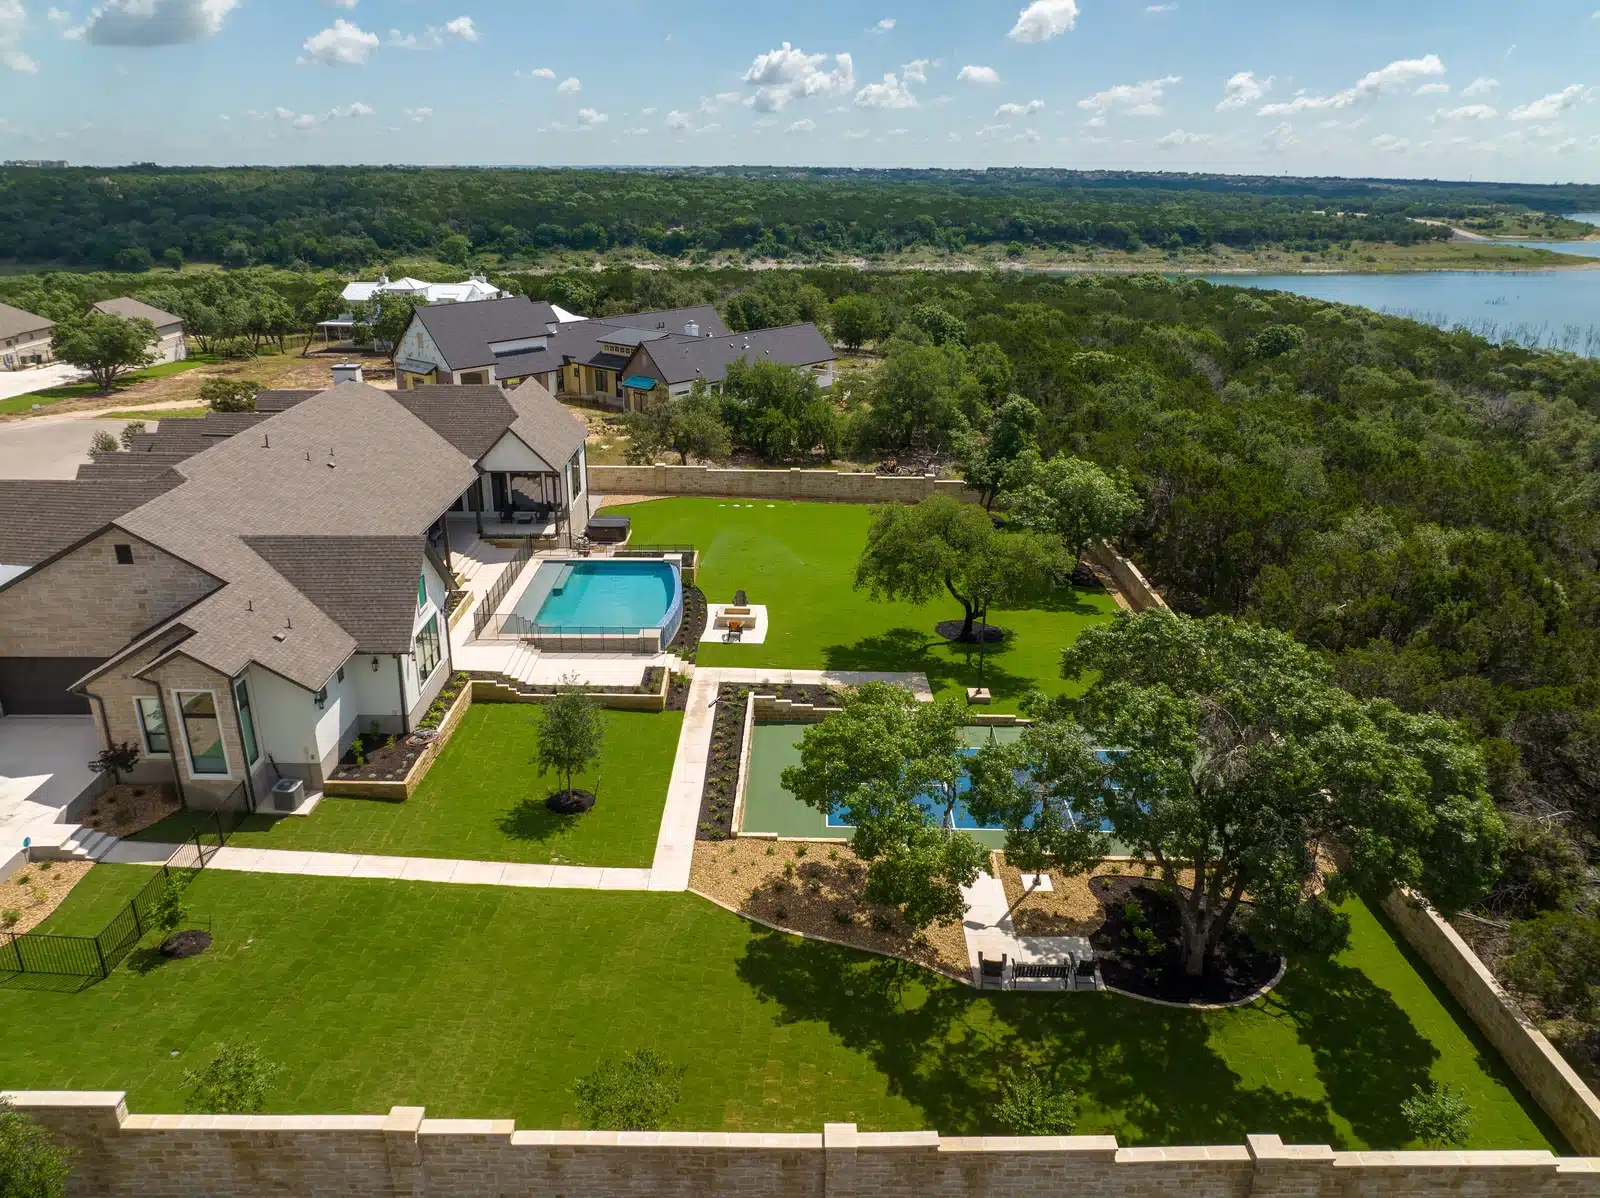 aerial view of Georgetown, Texas home near the lake with trees surrounding a backyard with a pool, tennis court, seating area and fire pit